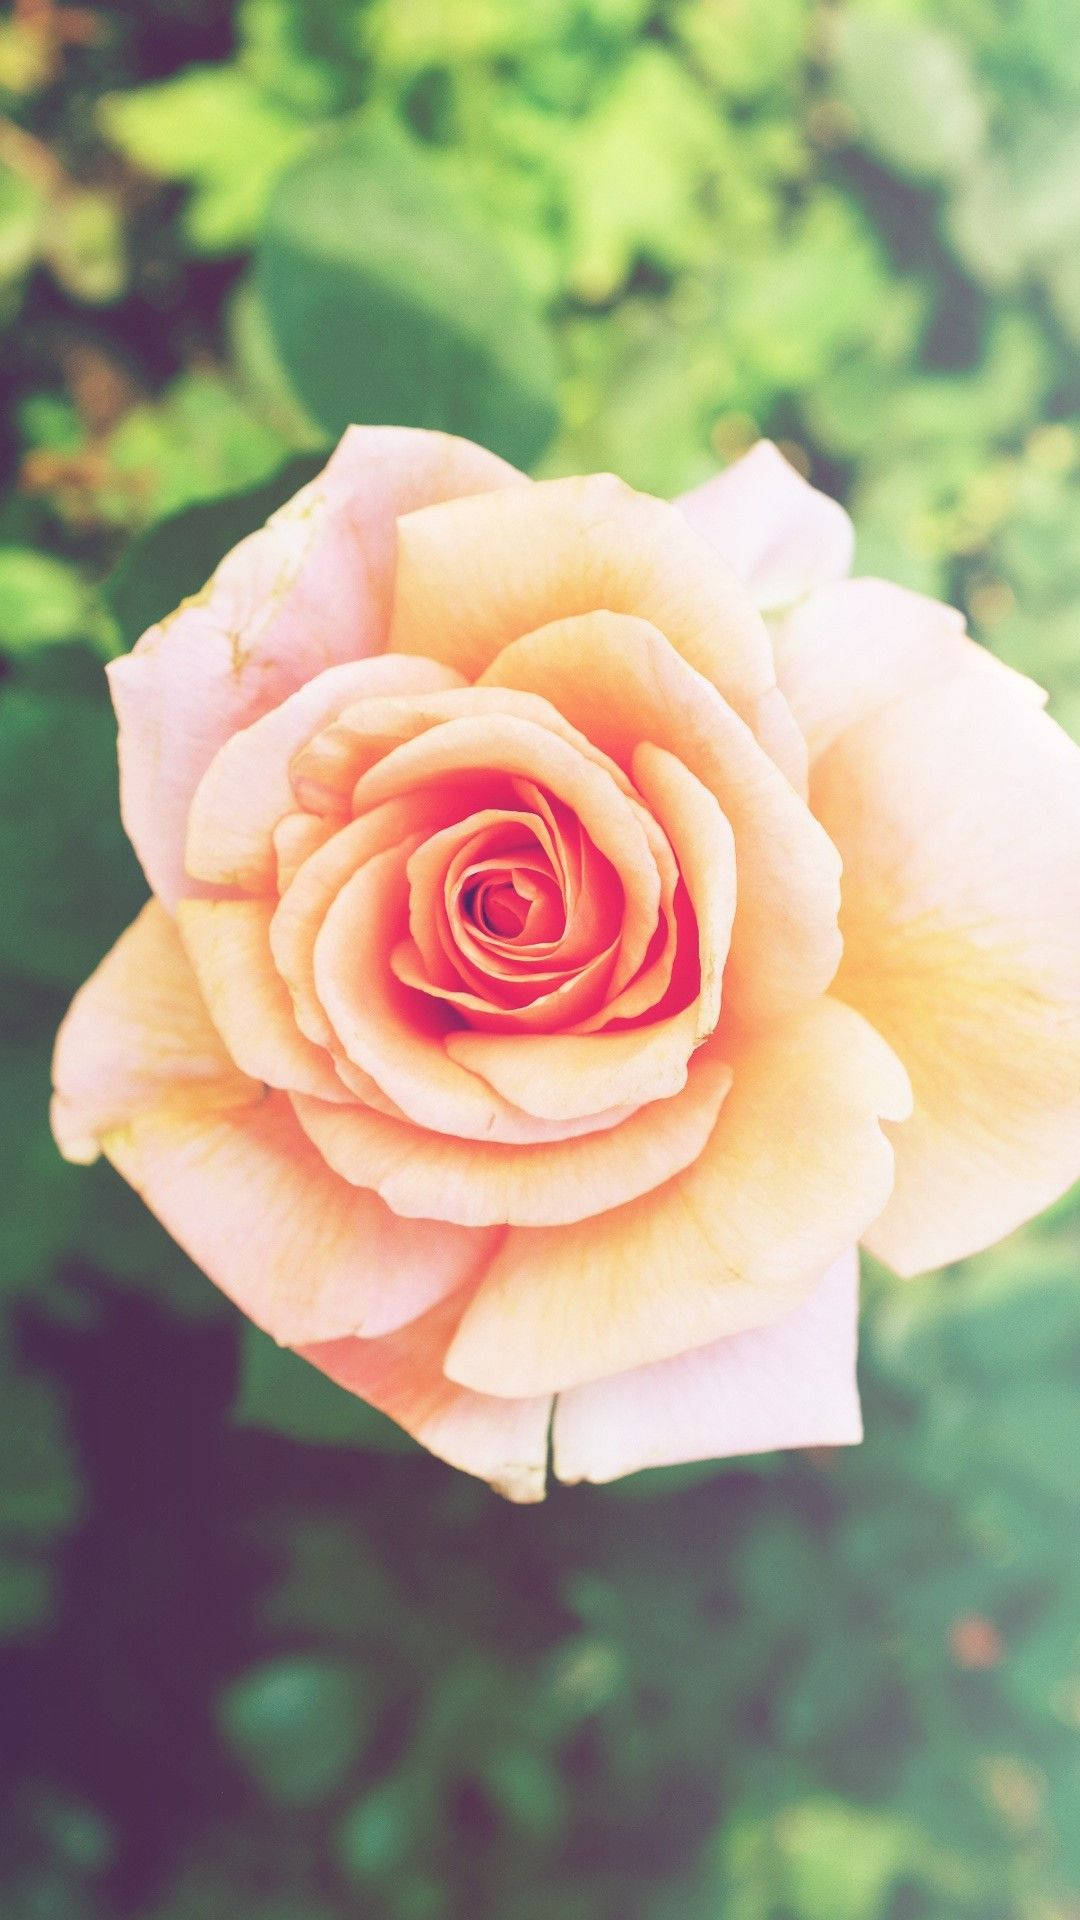 Peach-colored Rose Iphone Background